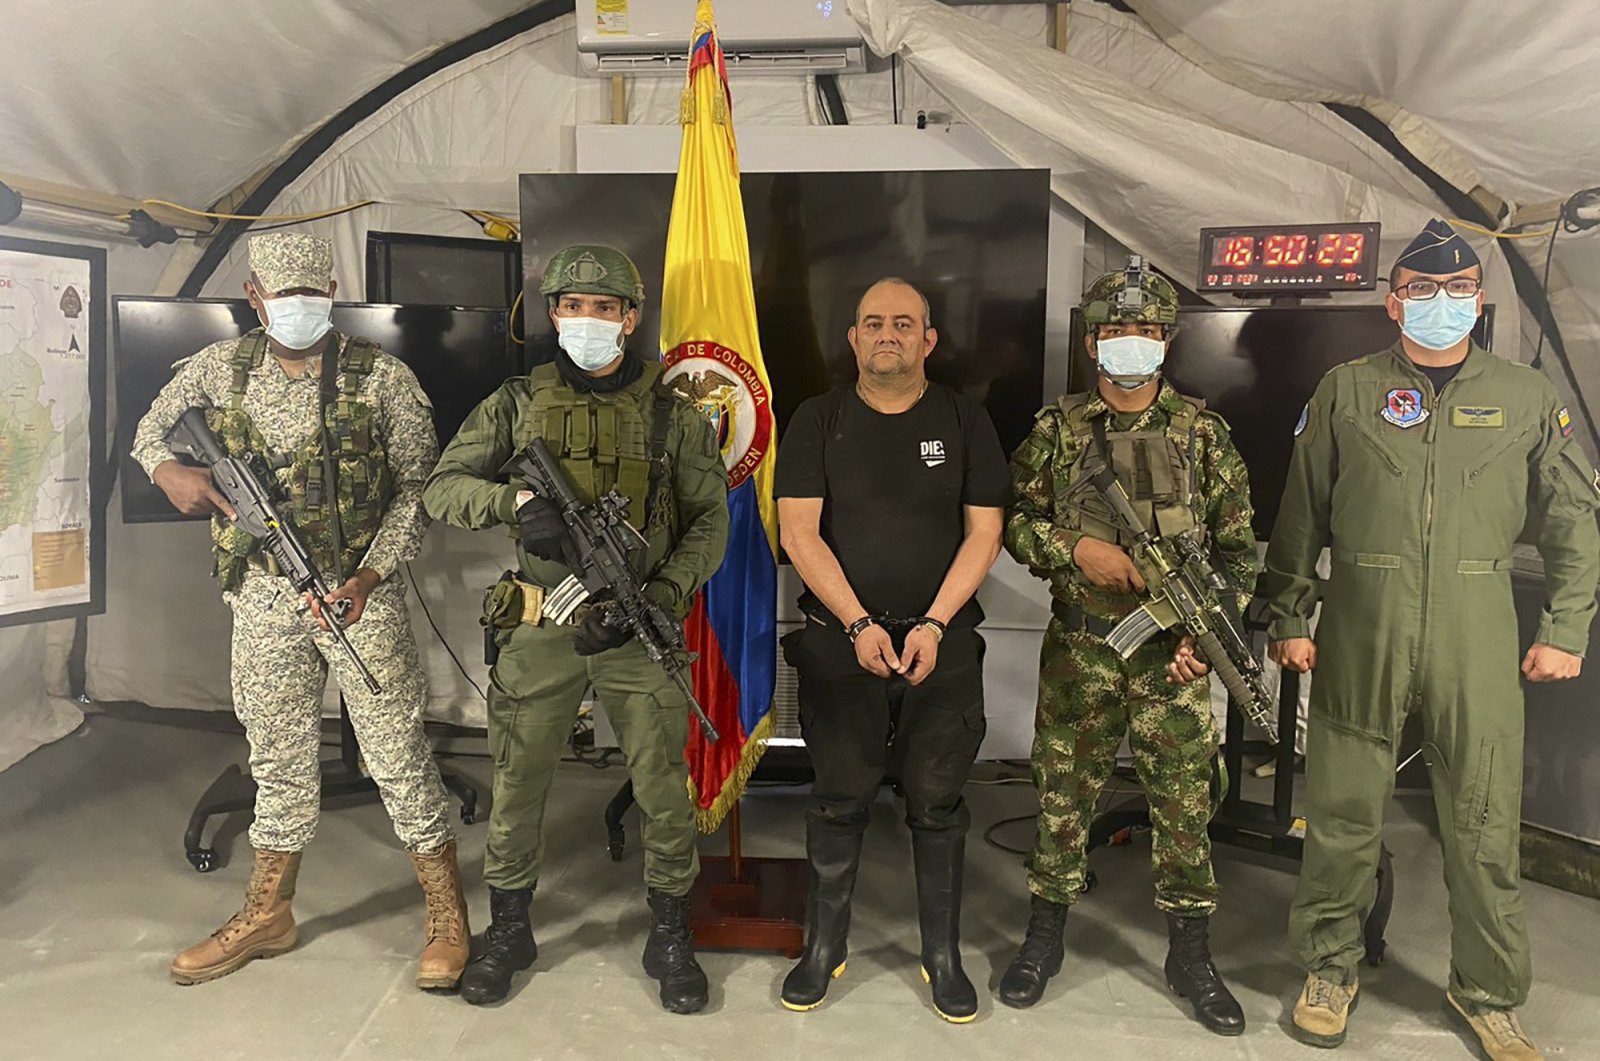 In this photo released by the Colombian presidential press office, one of the country’s most wanted drug traffickers, Dairo Antonio Usuga, alias “Otoniel,” leader of the violent Clan del Golfo cartel, is presented to the media at a military base in Necocli, Colombia, Oct. 23, 2021. (AP Photo)